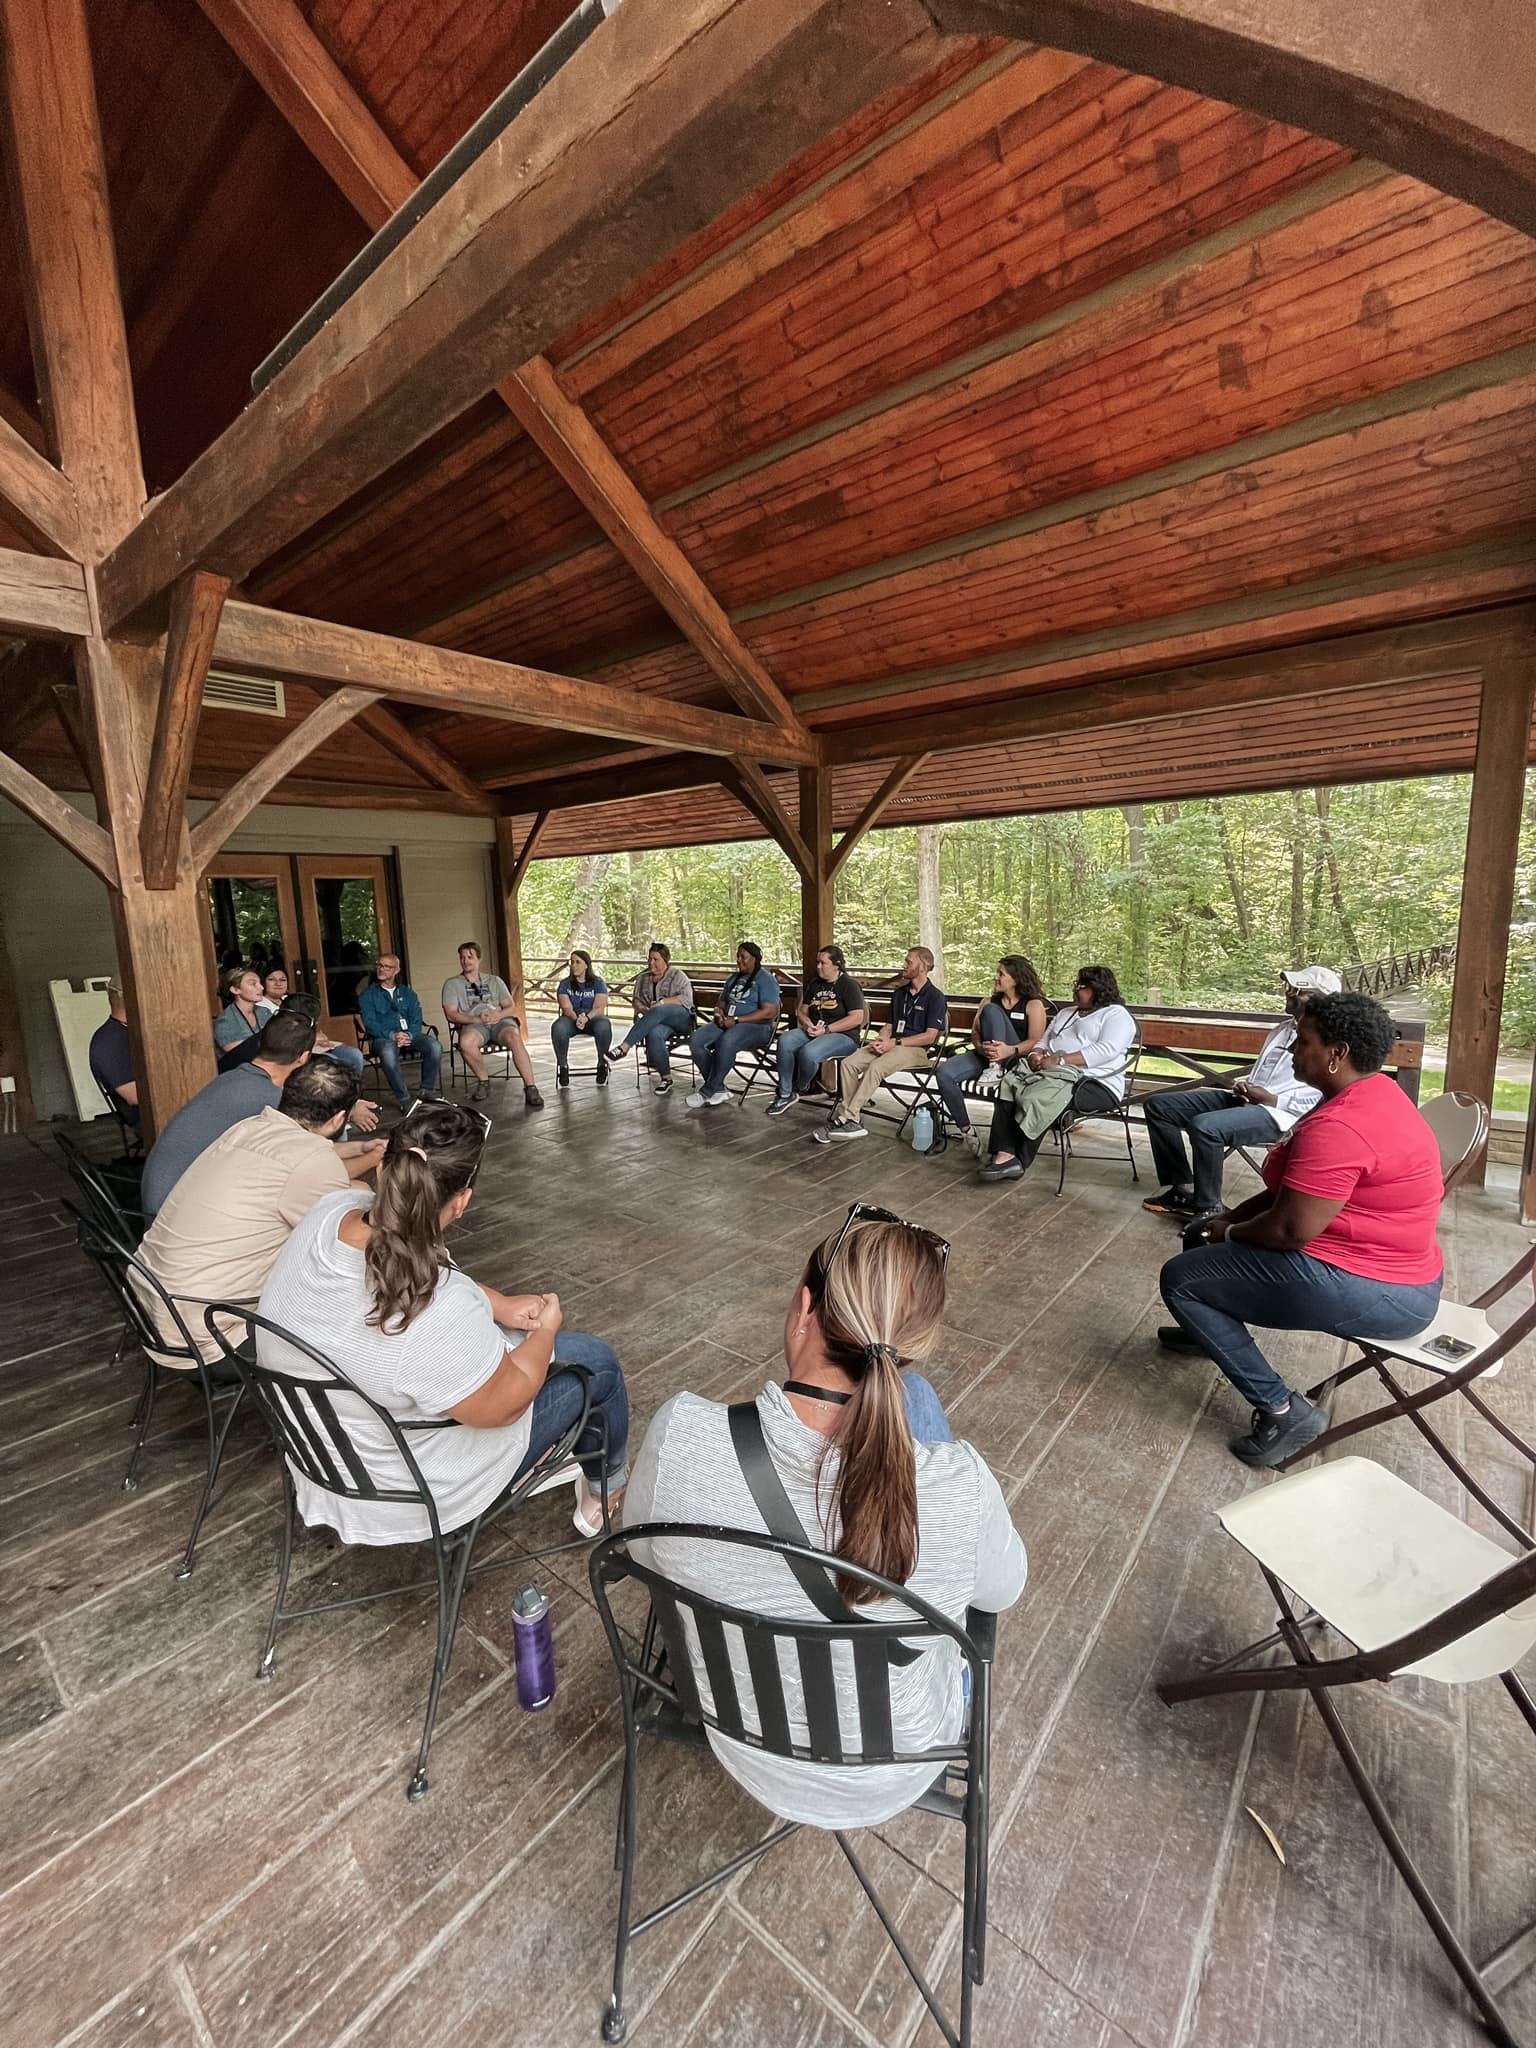 Image of people sitting in chairs in a circle while engaged in discussion